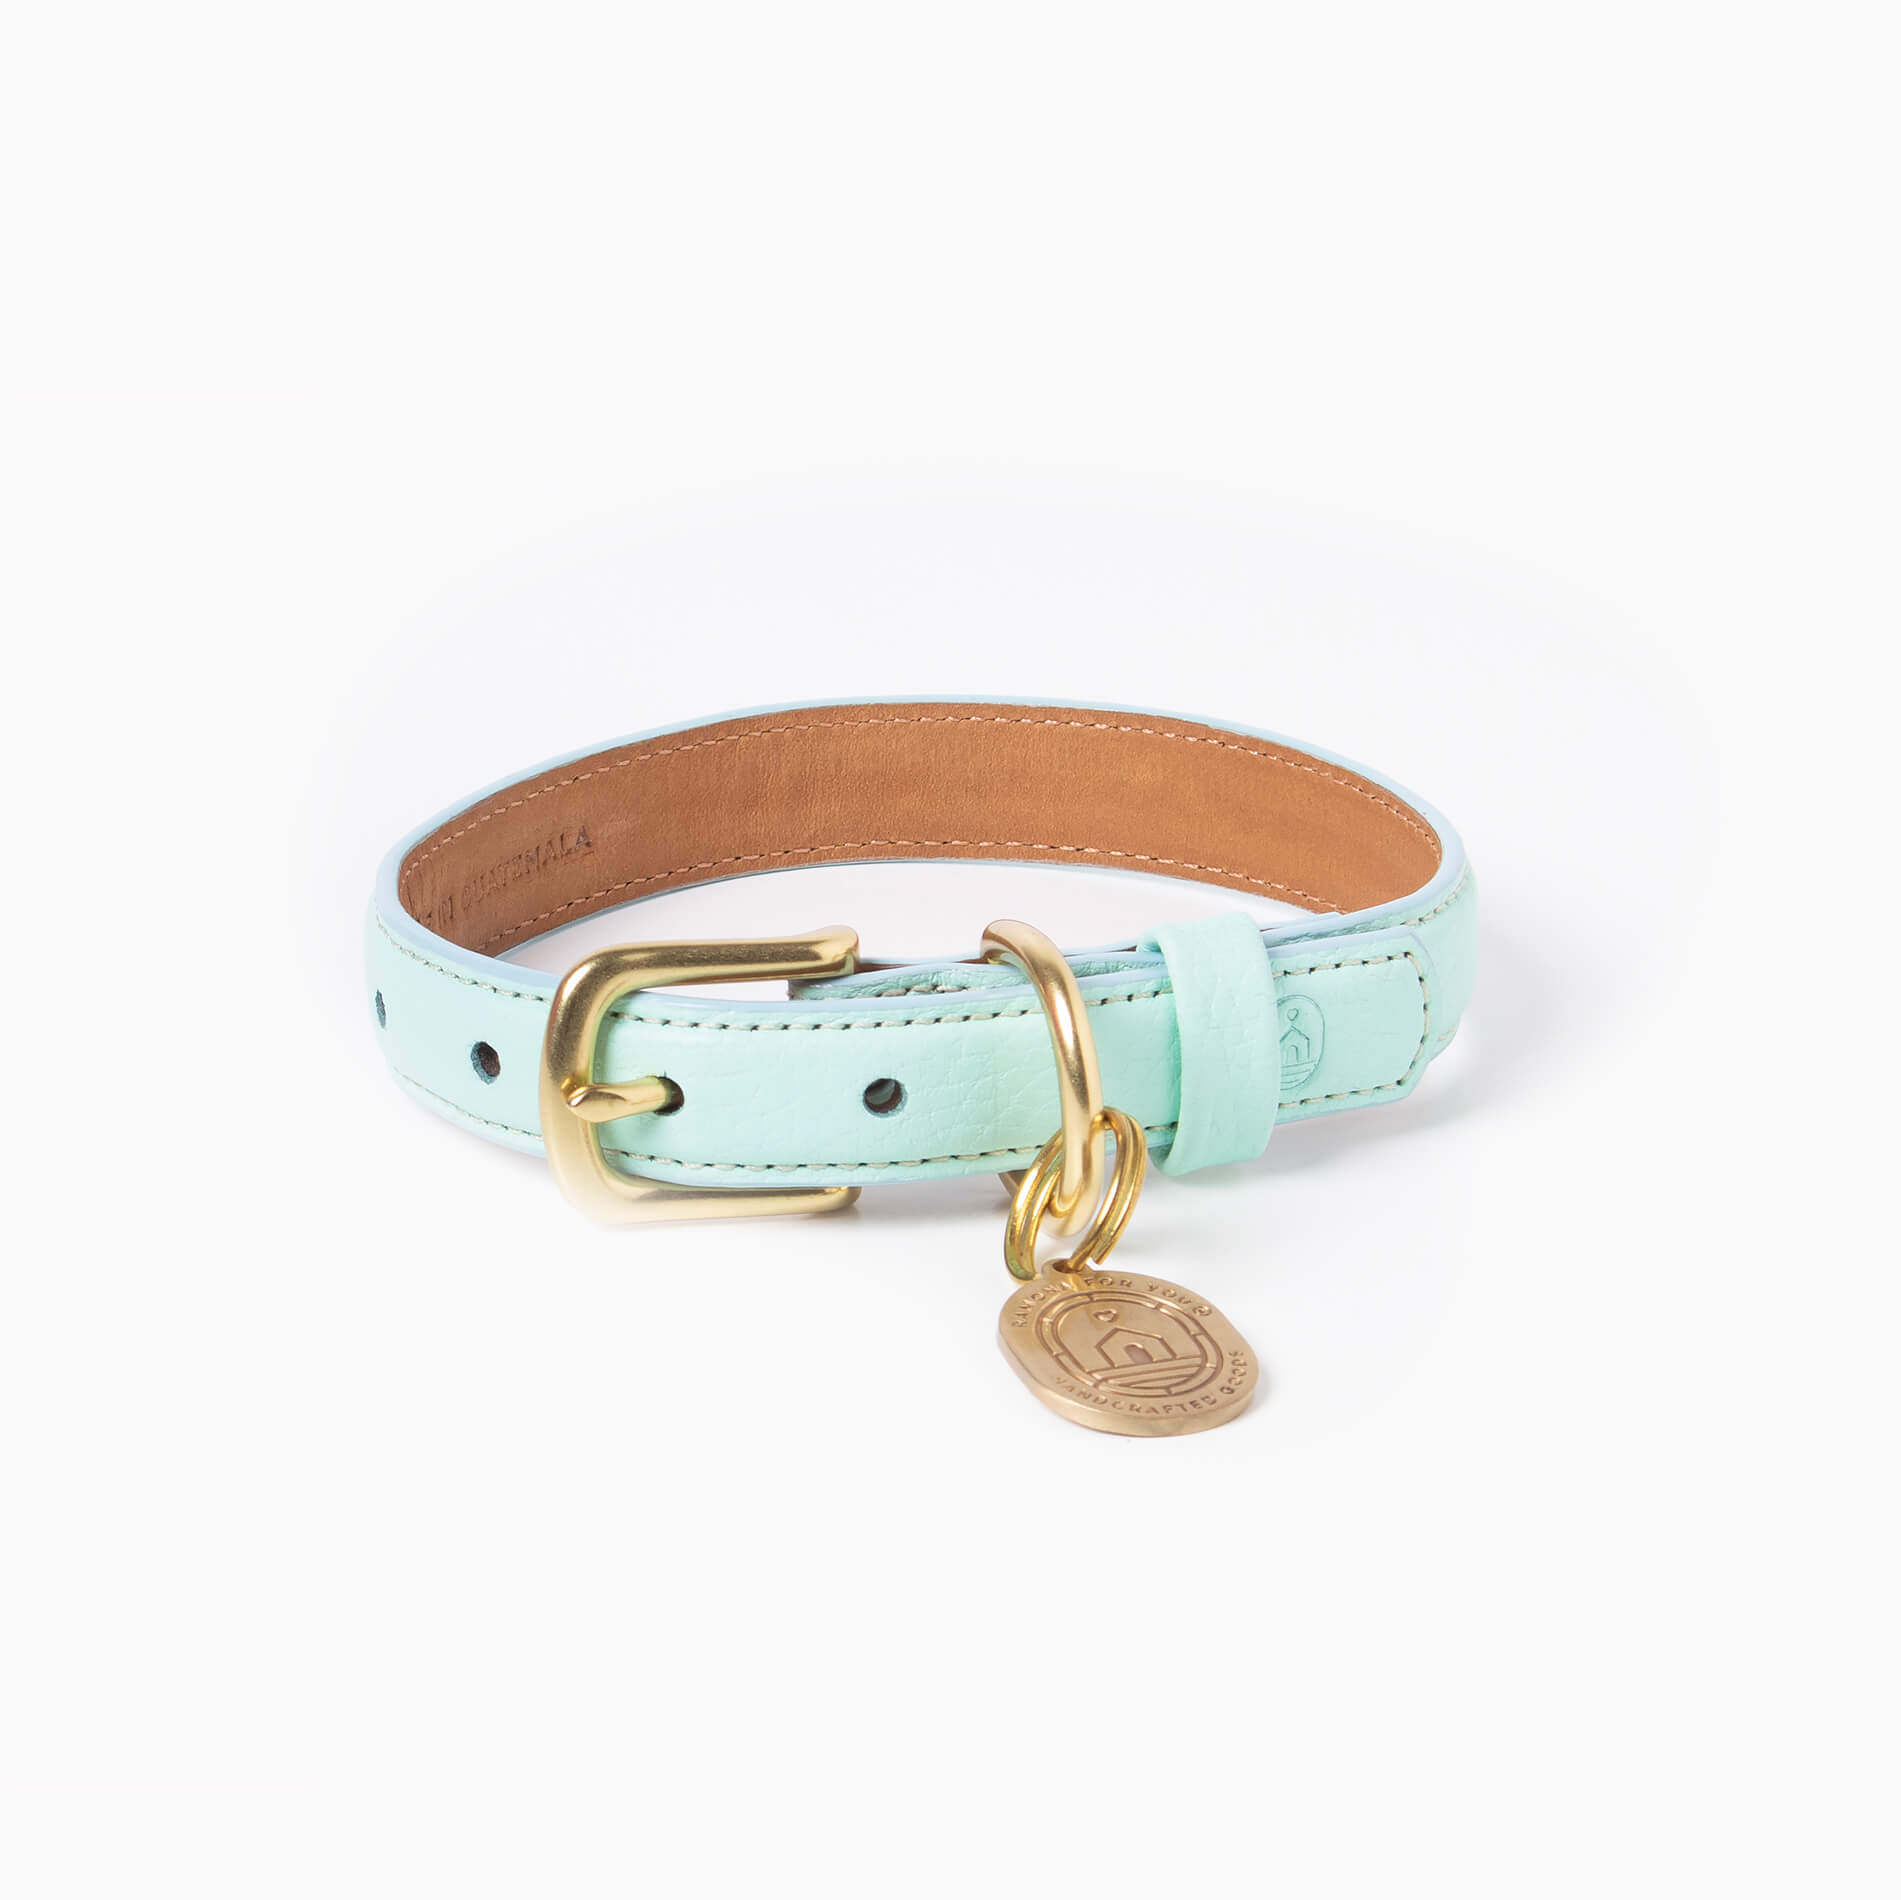 Mint leather dog collar with with brass hardware and tag ID. Luxury dog collar.